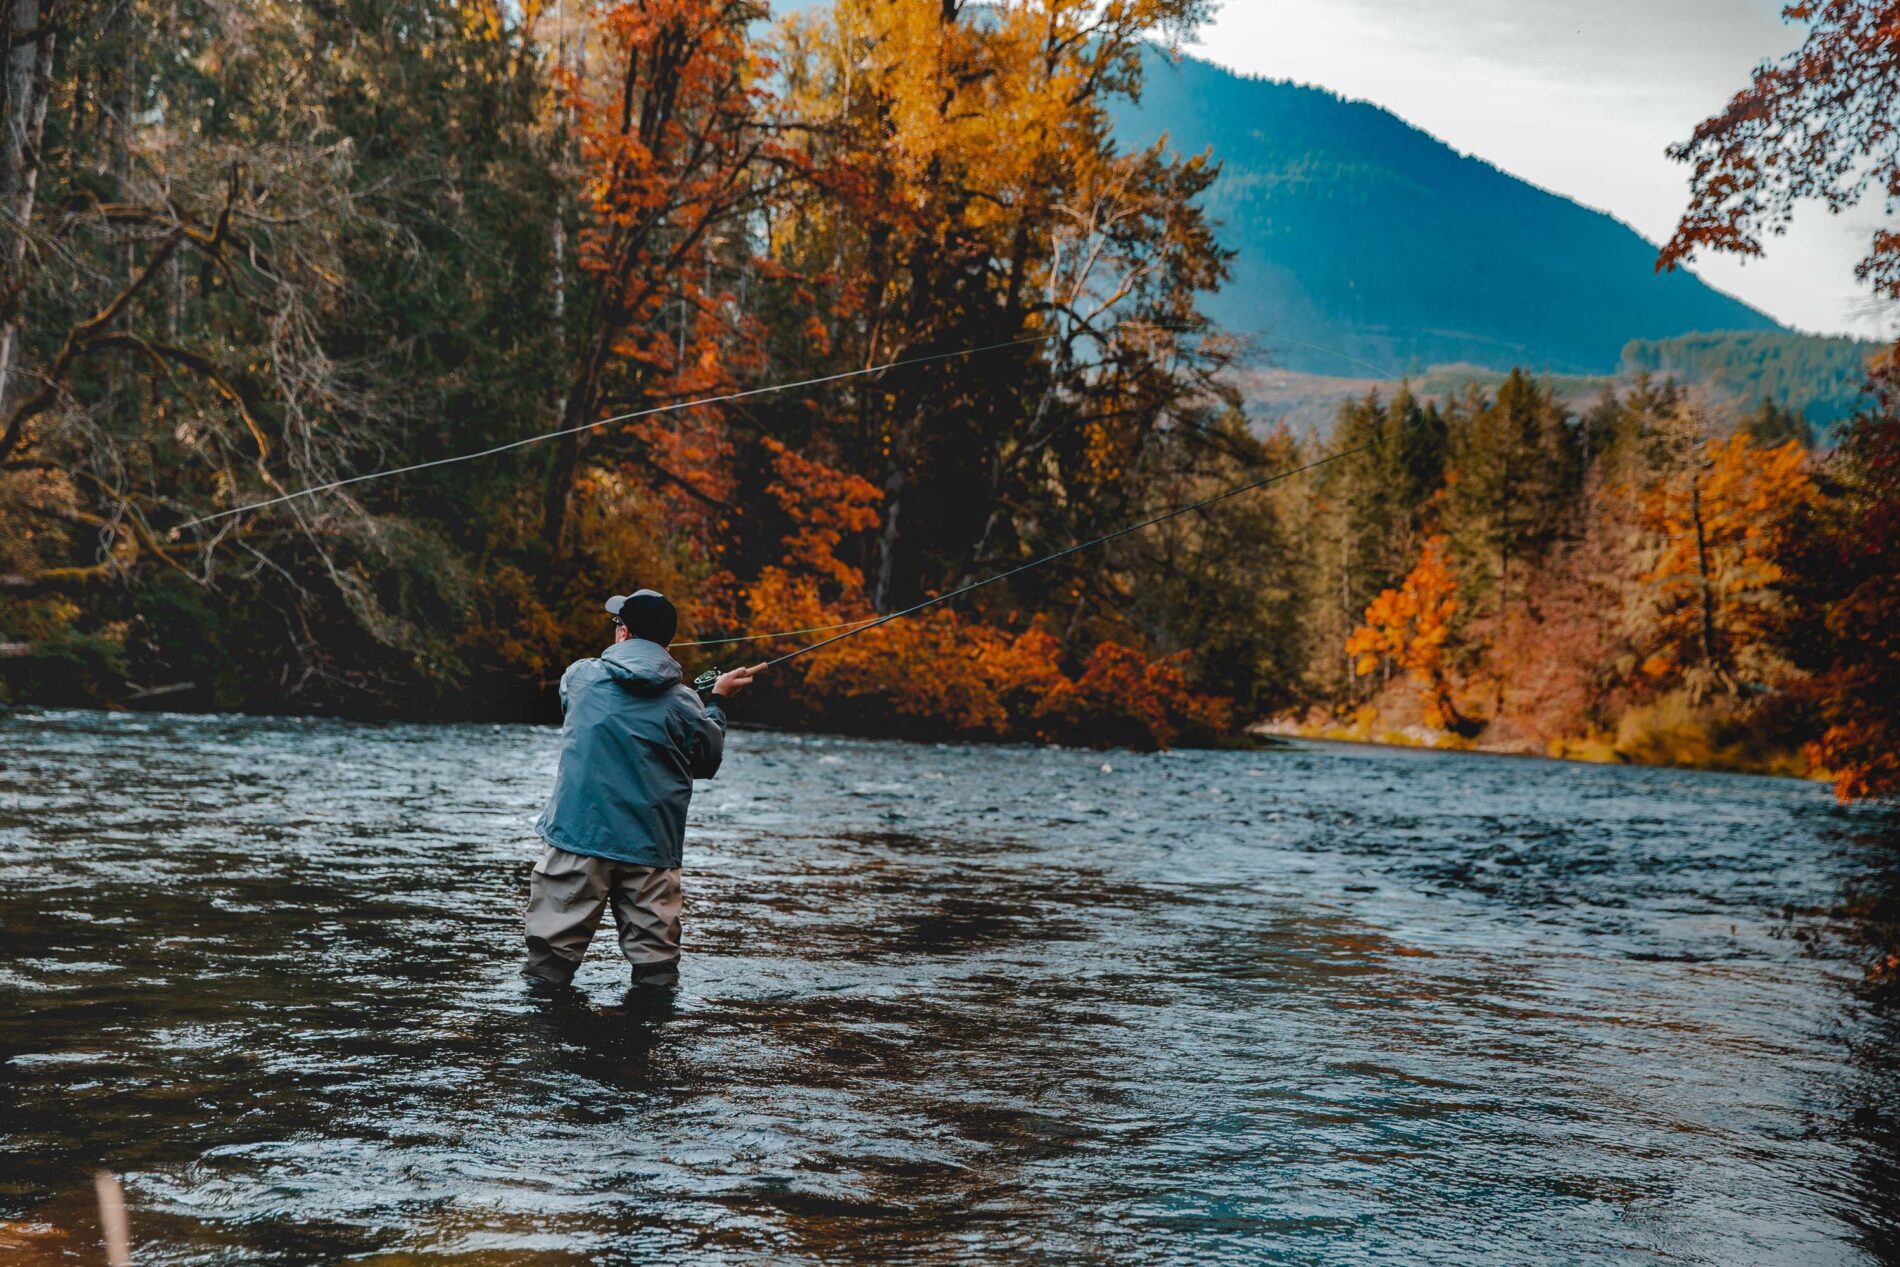 The Cowichan River has some of the best fly fishing in Canada.